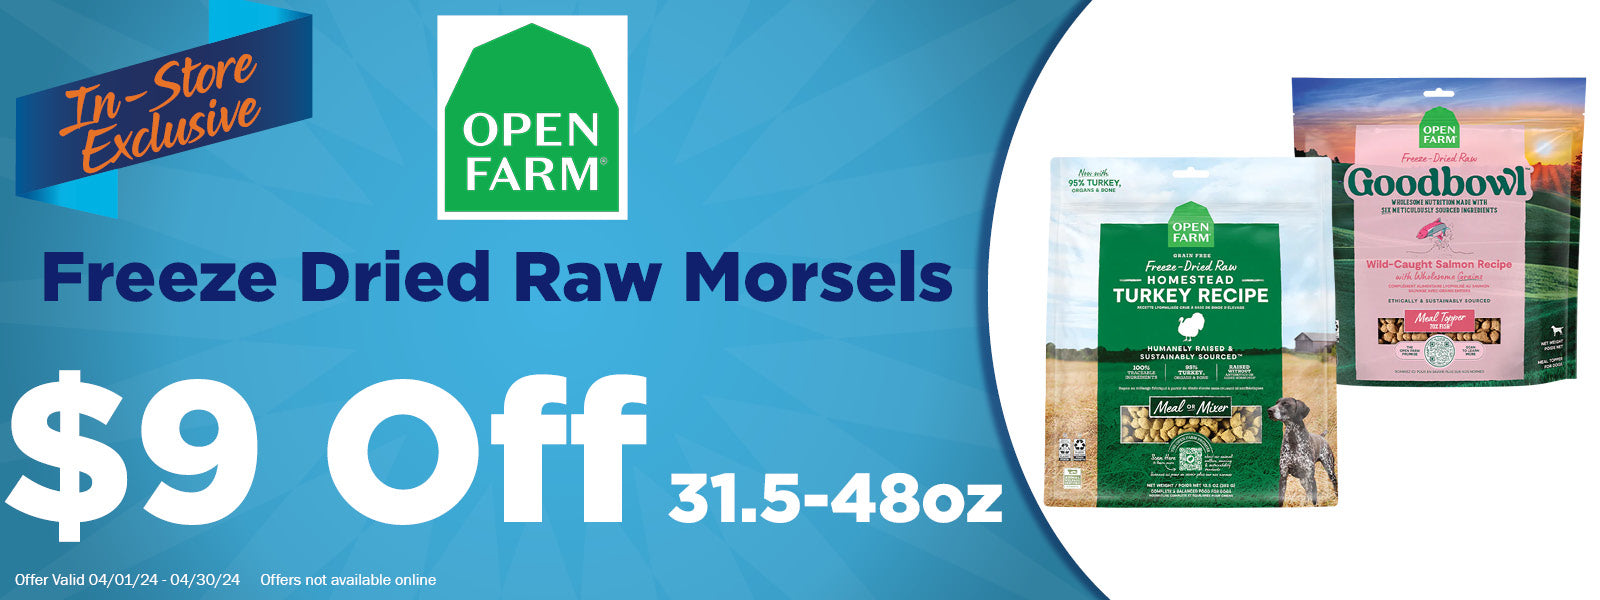 In-Store Exclusive Offer - Open Farm Freeze Dried Morsels $9 off 31oz+